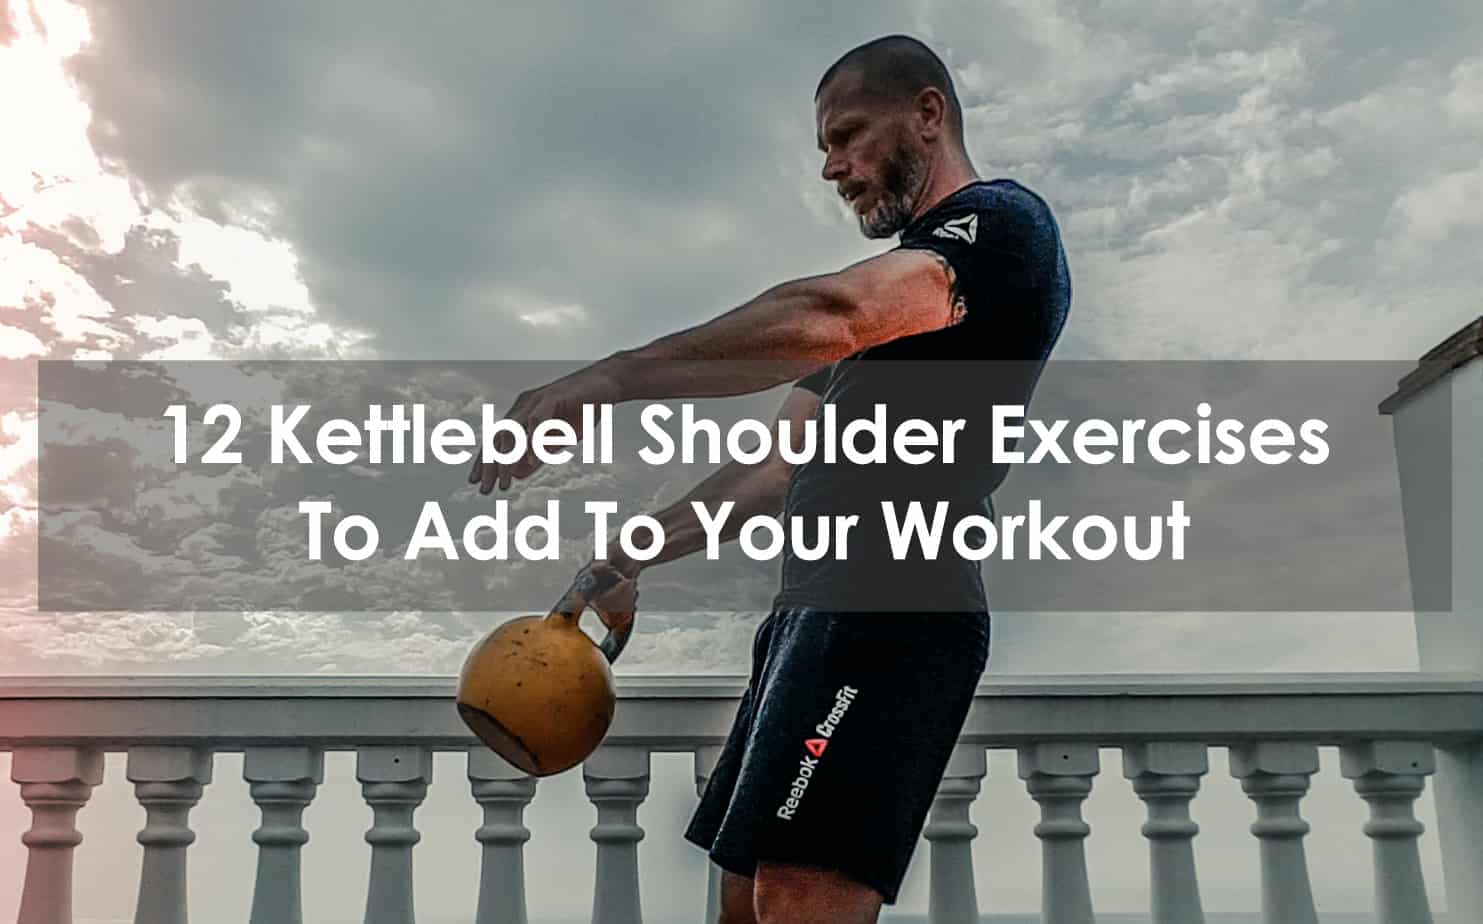 Kettlebell Shoulder Add To Your Workout